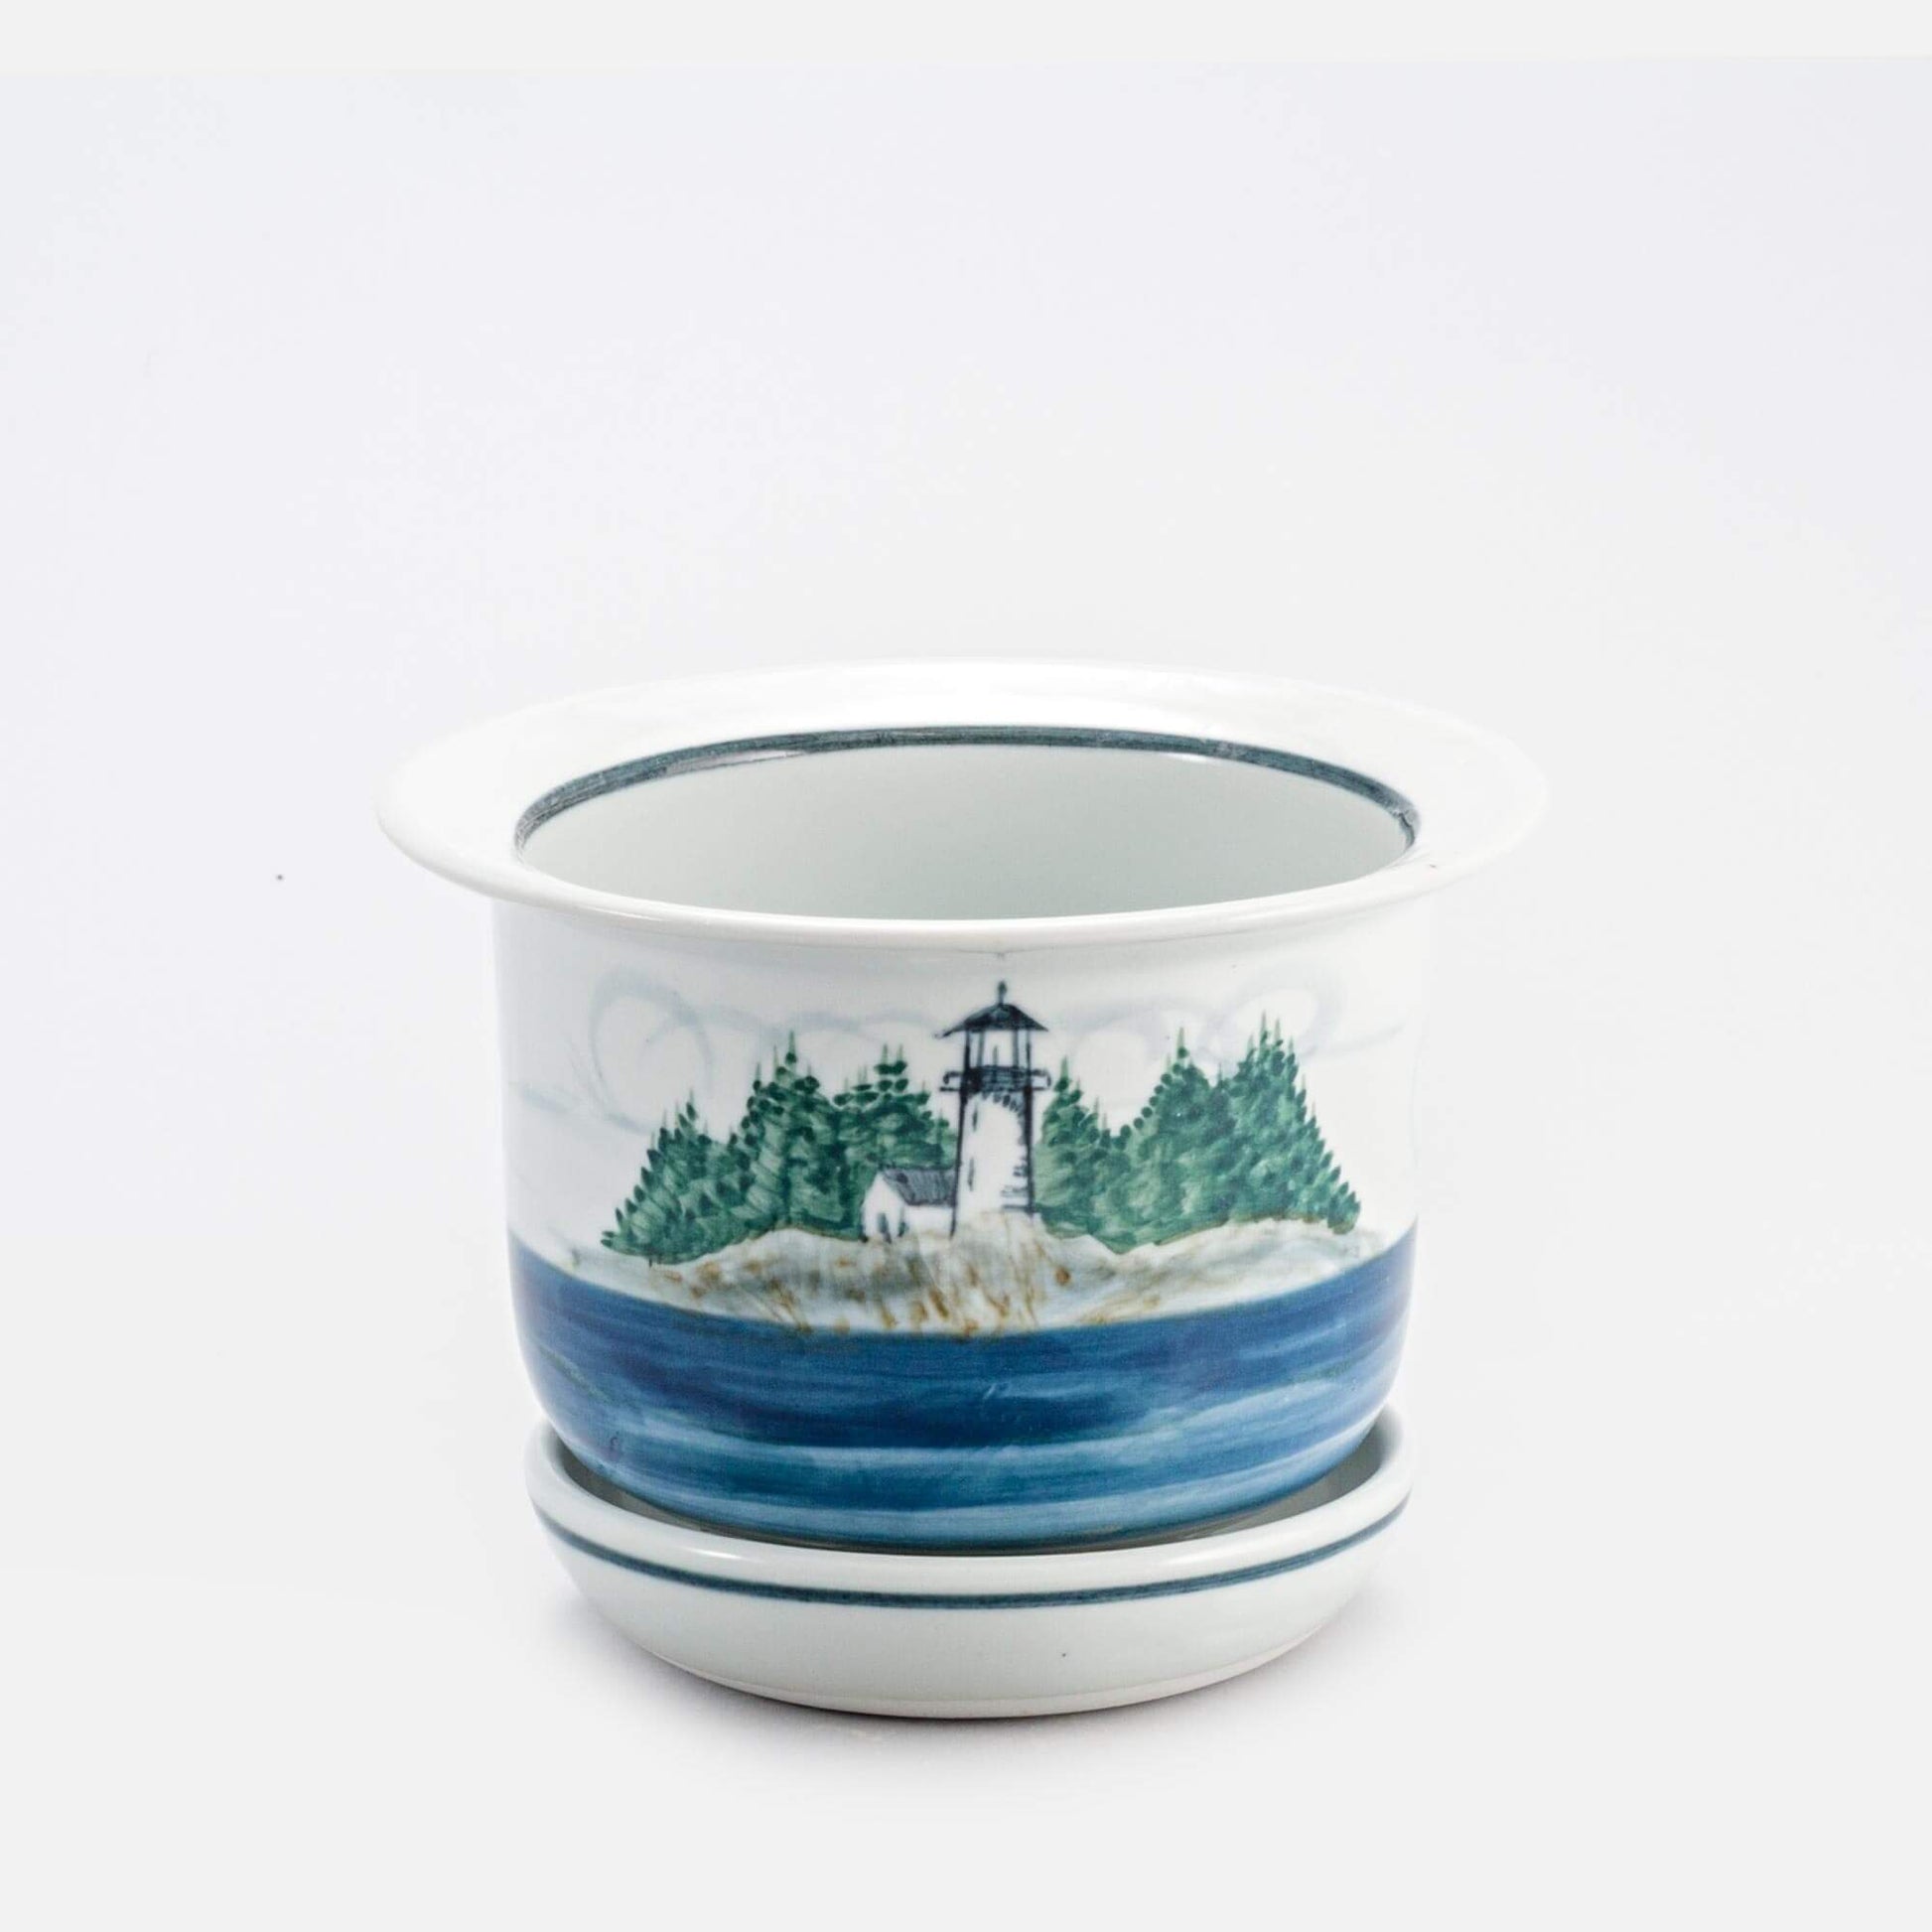 Handmade Pottery 7 Inch Ring Planter in Lighthouse pattern made by Georgetown Pottery in Maine